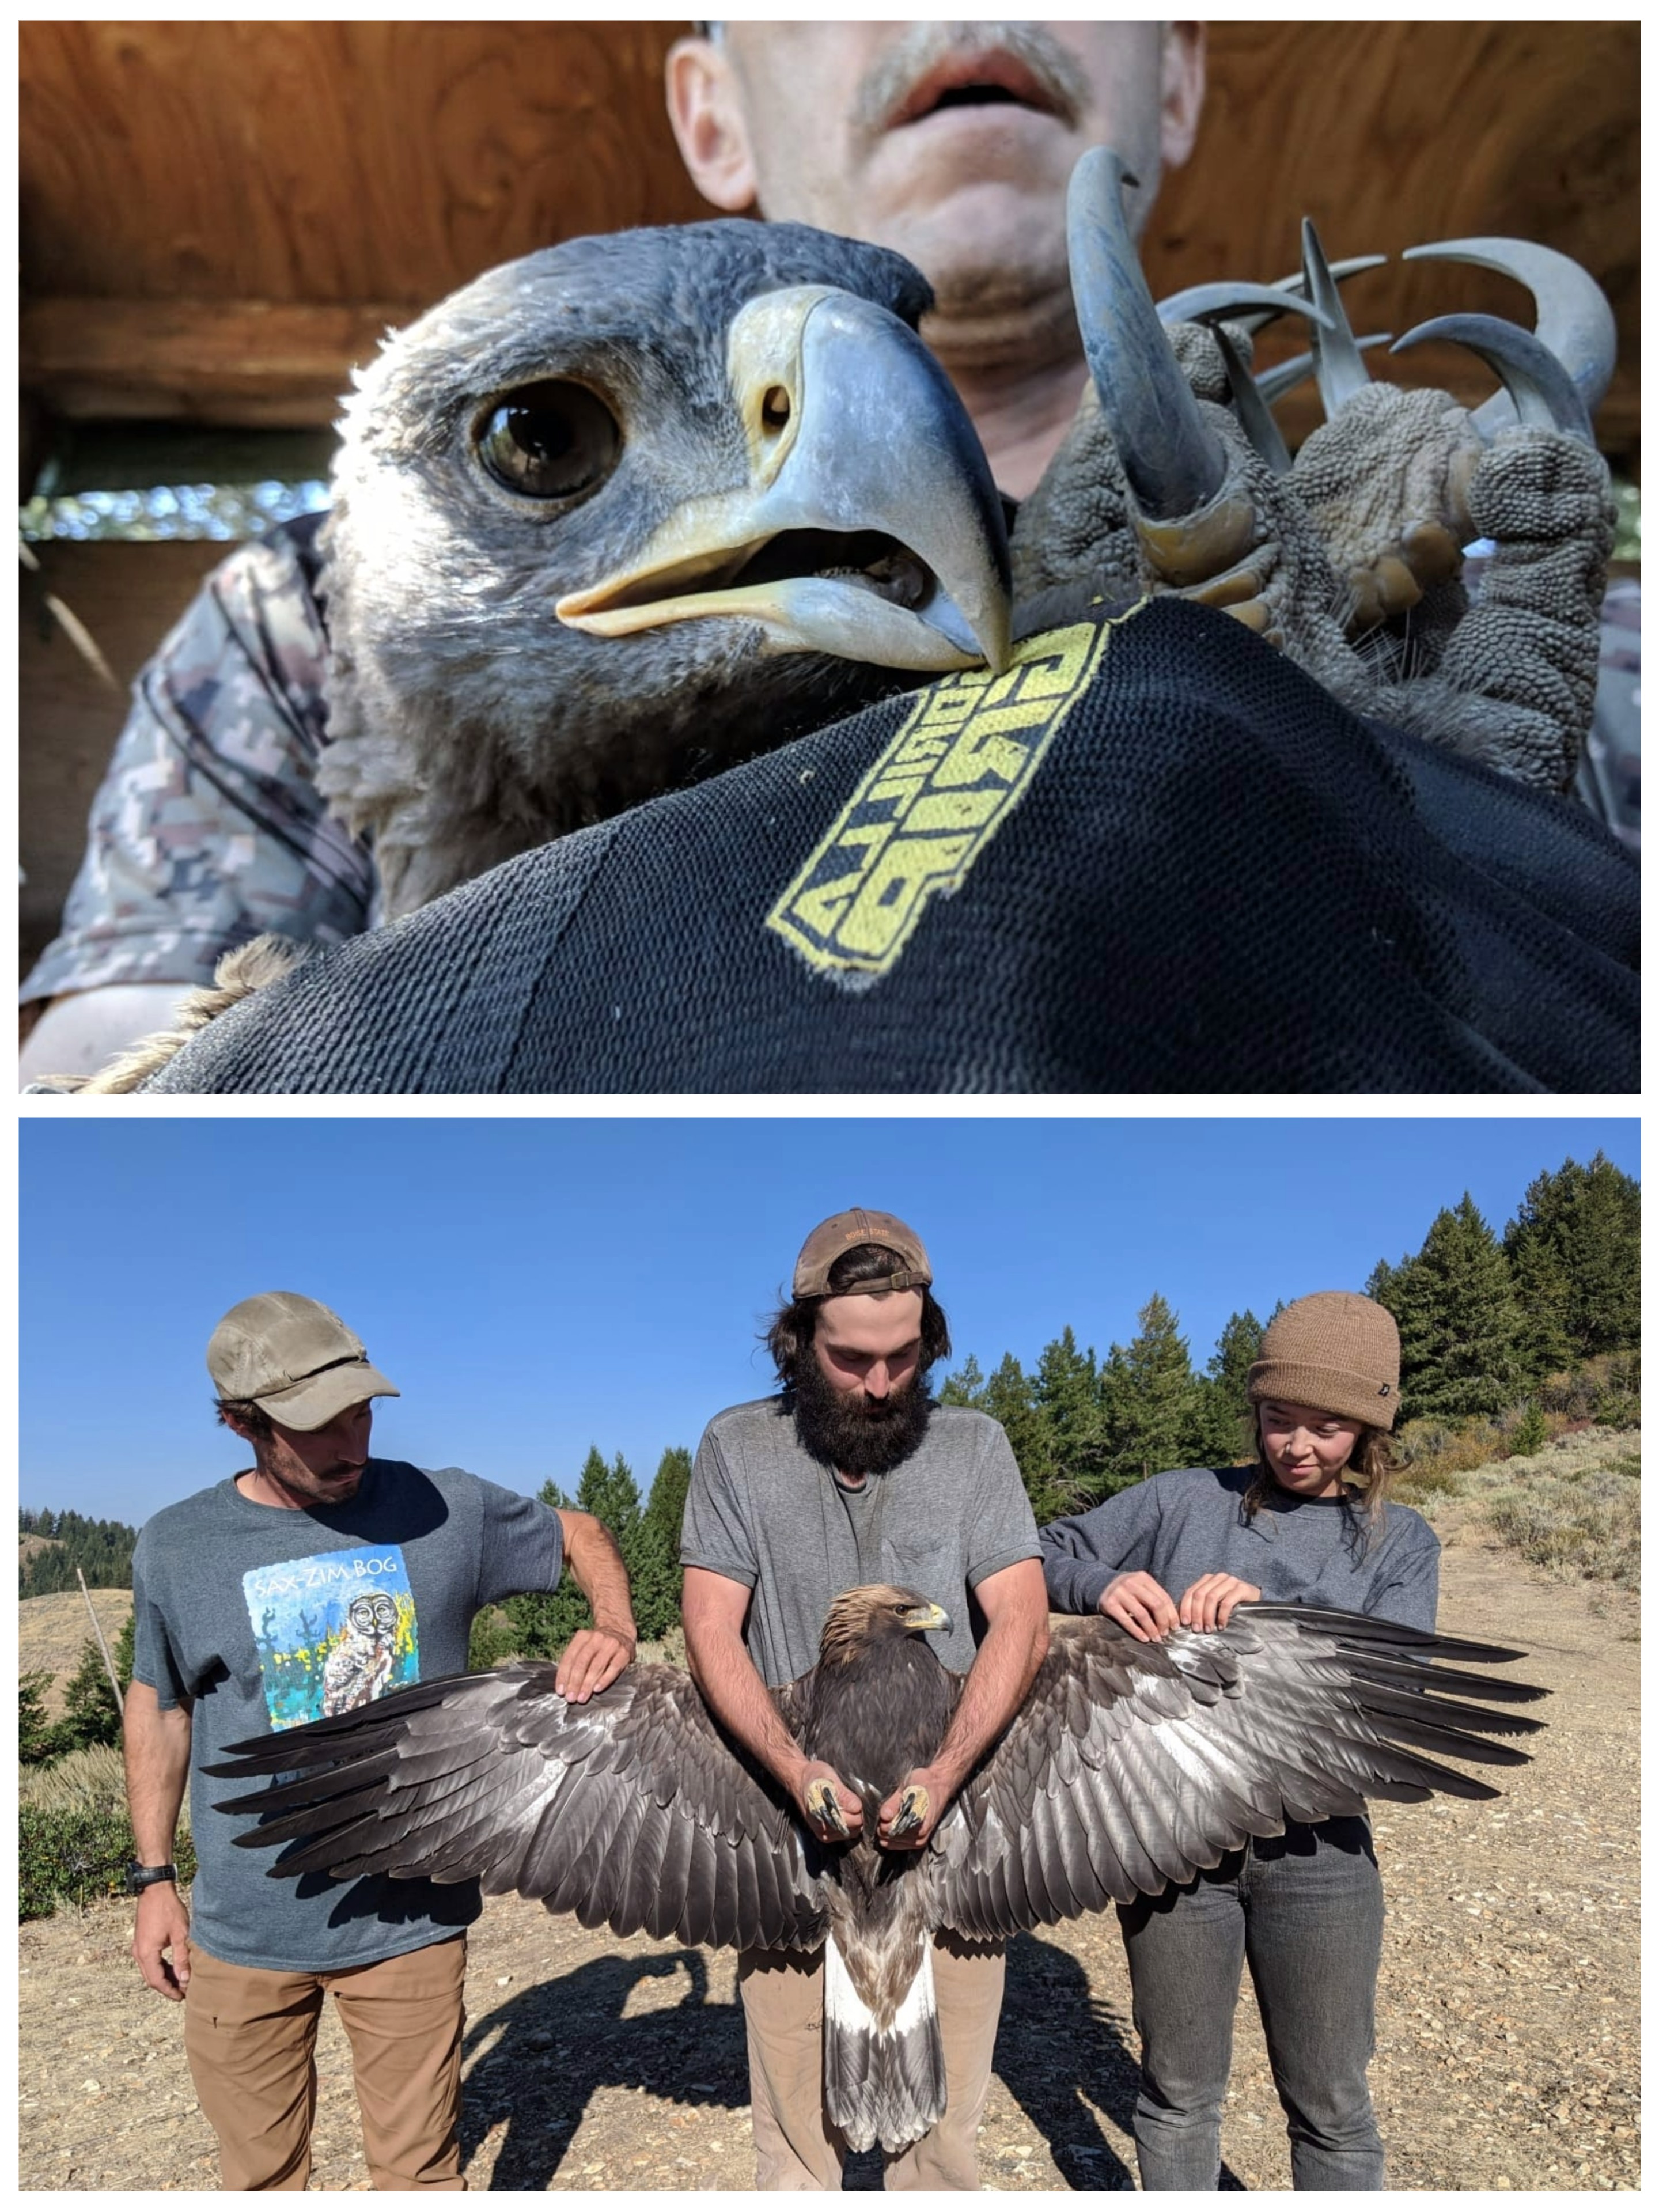 top image shows a selfie style view of a biologist holding the large talons of a golden eagle. bottom photo shows a biologist holding a golden eagle's talons while two other biologists assist in spreading its wings. all three biologists are examining the eagle intently